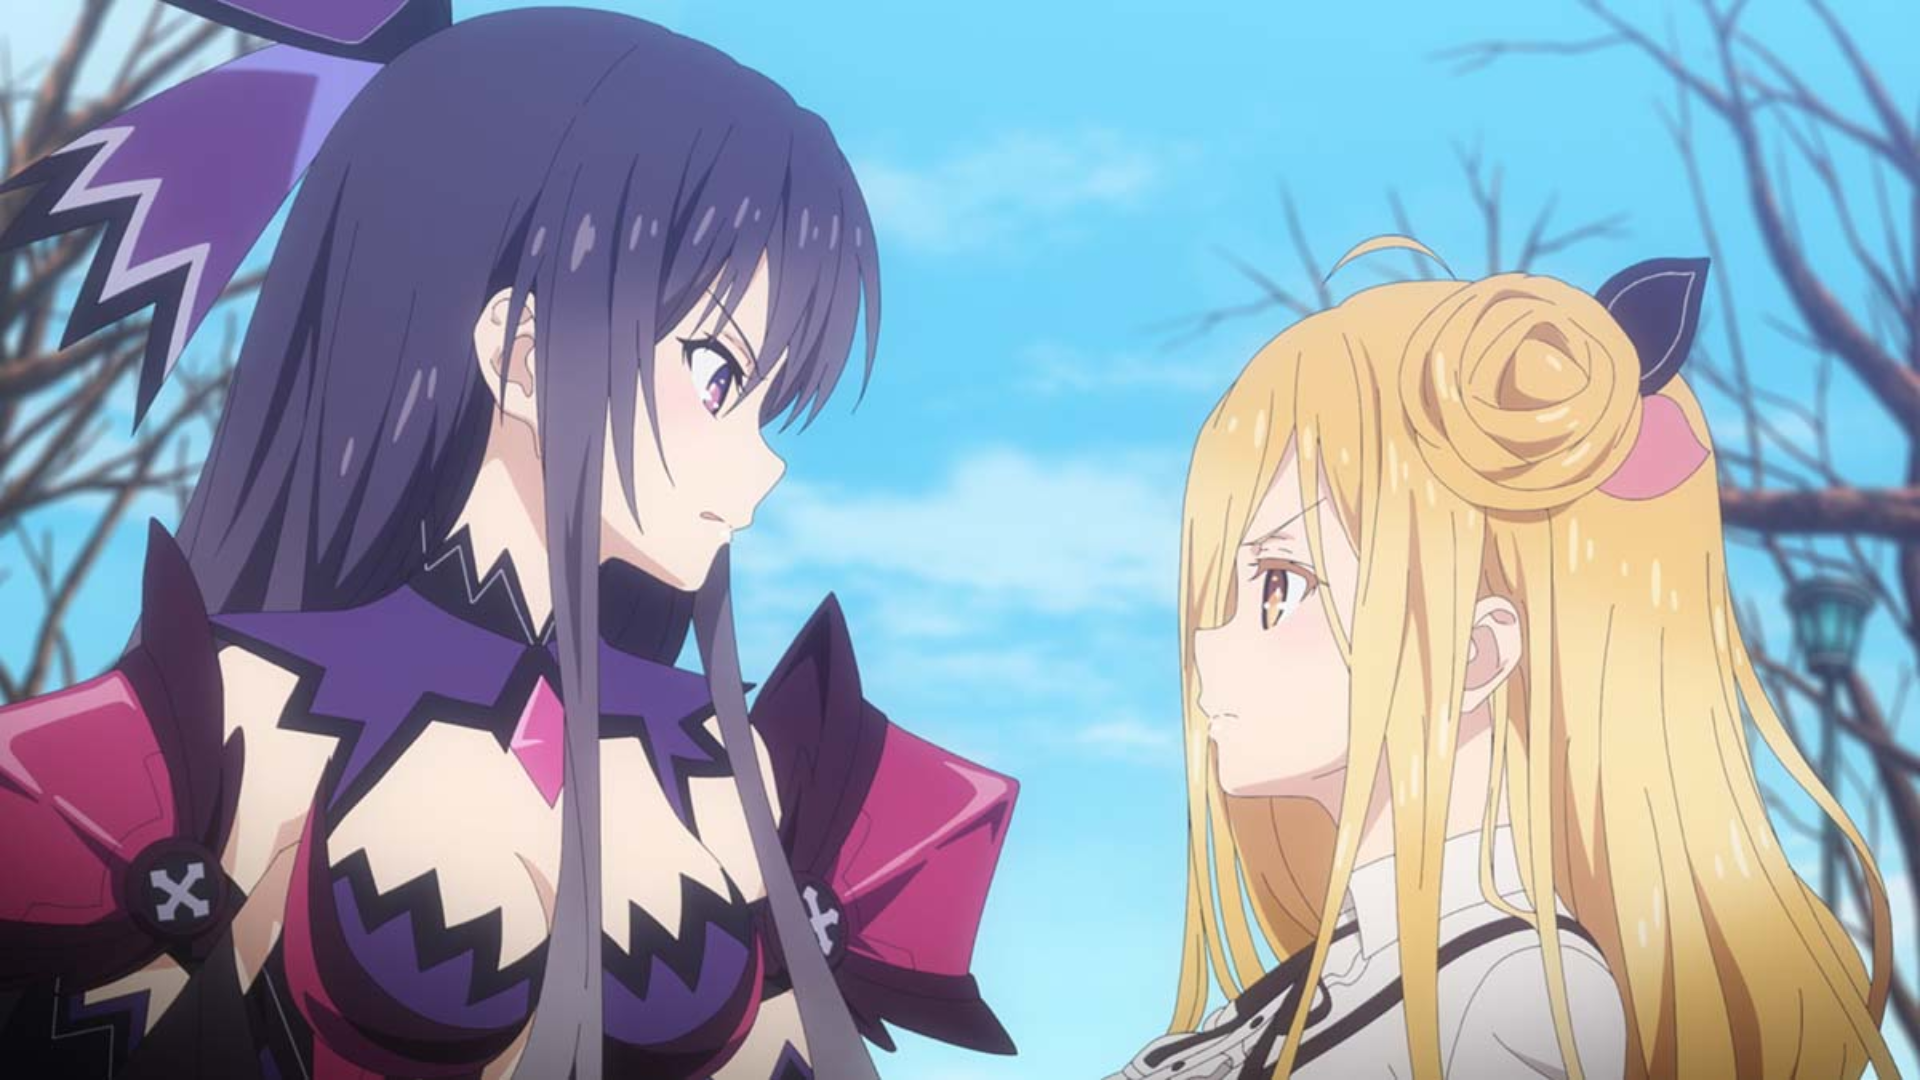 Date a Live IV Episode 7 Preview Images Released - Anime Corner